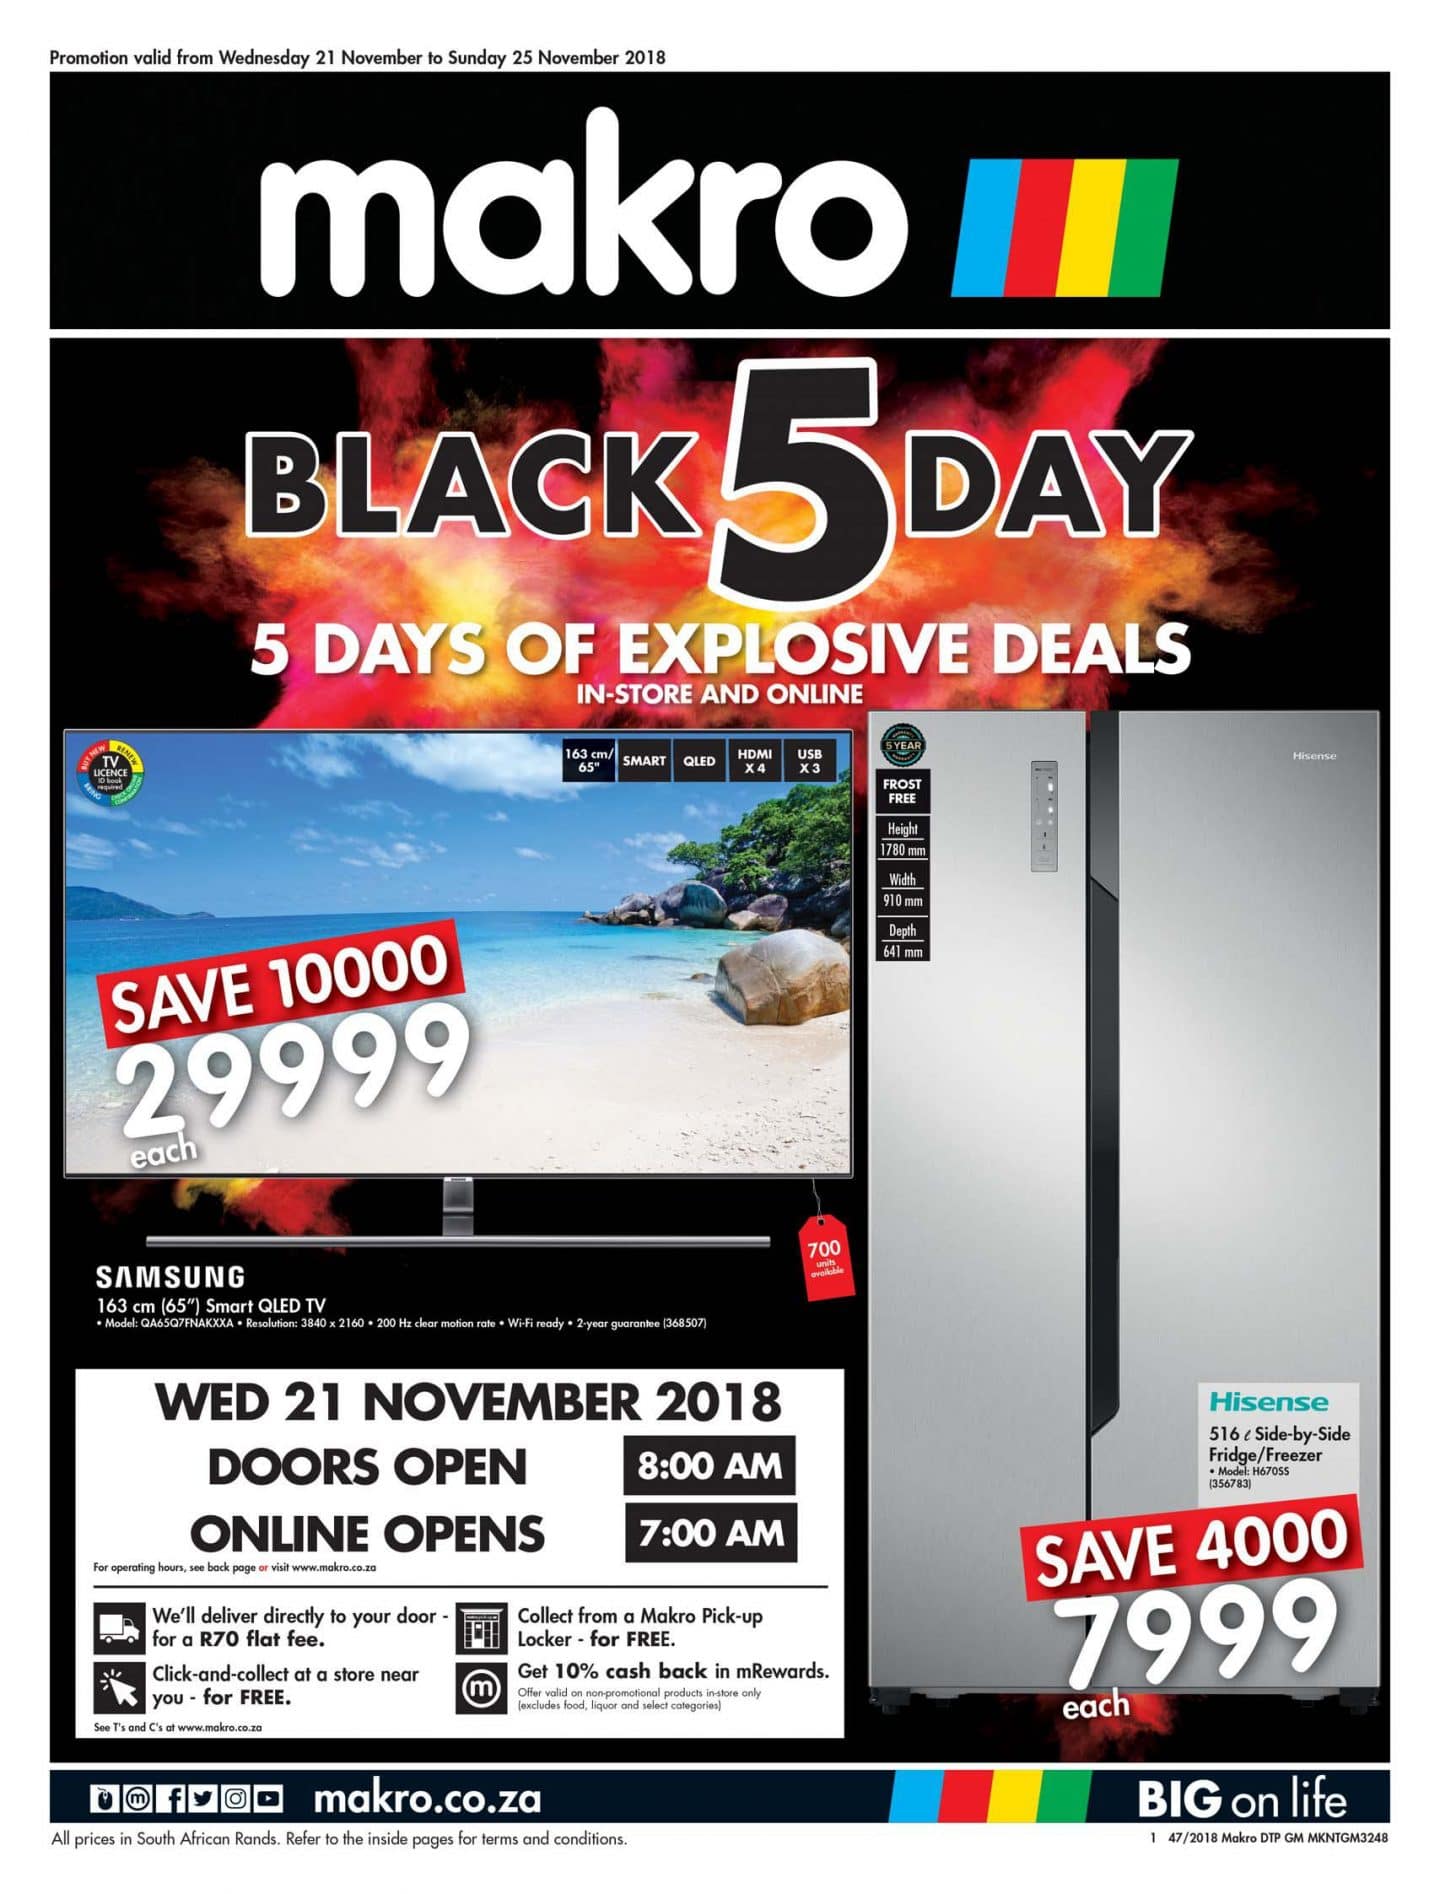 Makro Black Friday Catalogue Specials 2019 - What Will Wwbw Black Friday Deals Be